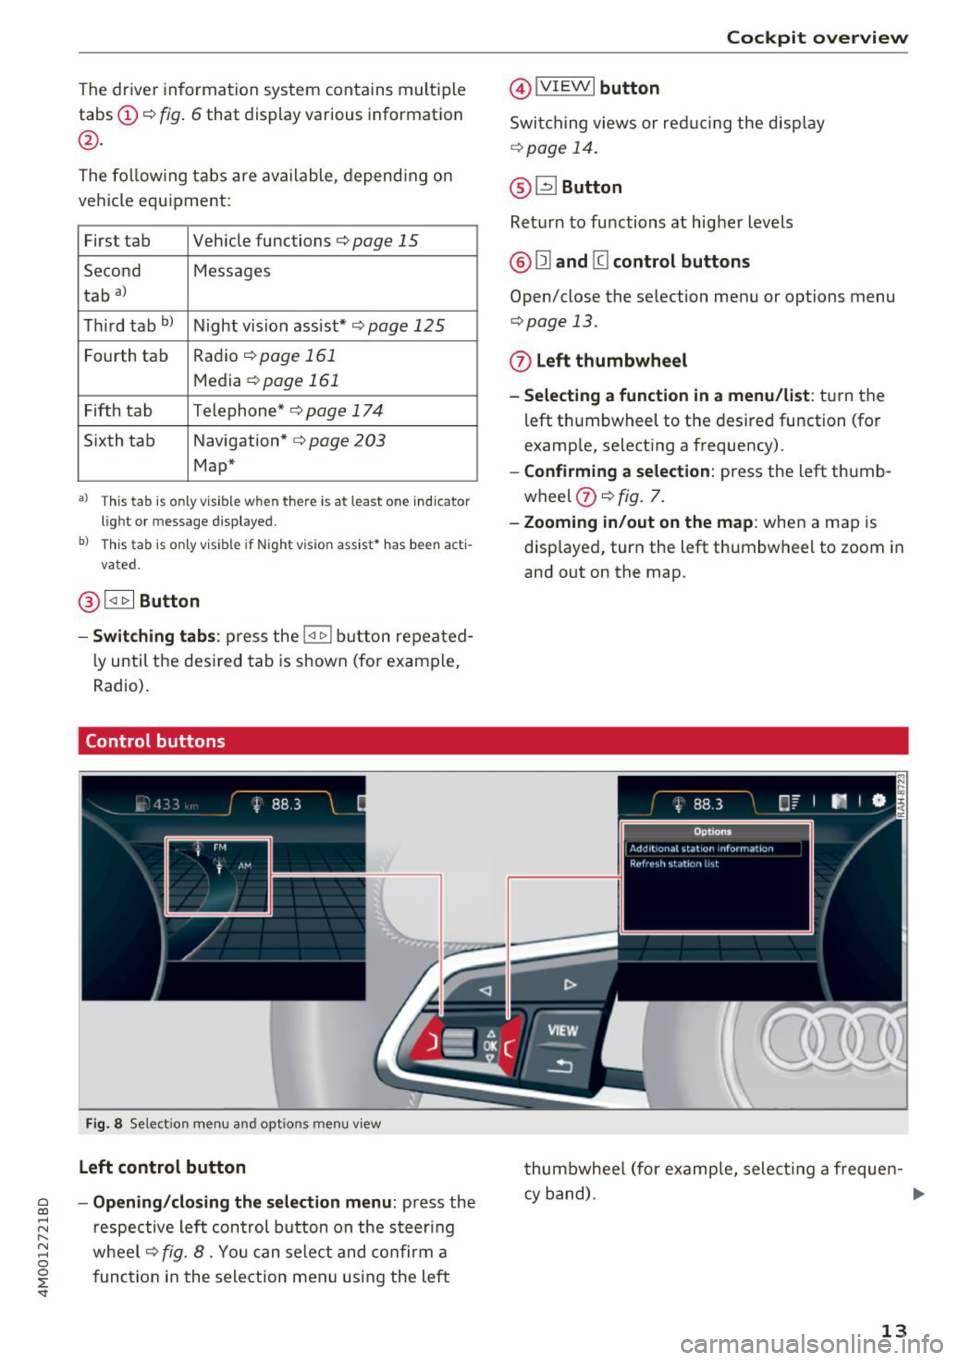 AUDI Q7 2018  Owner´s Manual a co ...... N r--. N ...... 0 
0 
:E <I 
The  driver information  system  contains  multiple 
tabs 
(D c::> fig . 6 that  display  various  information 
@. 
The  follow ing  tabs  are  available,  d